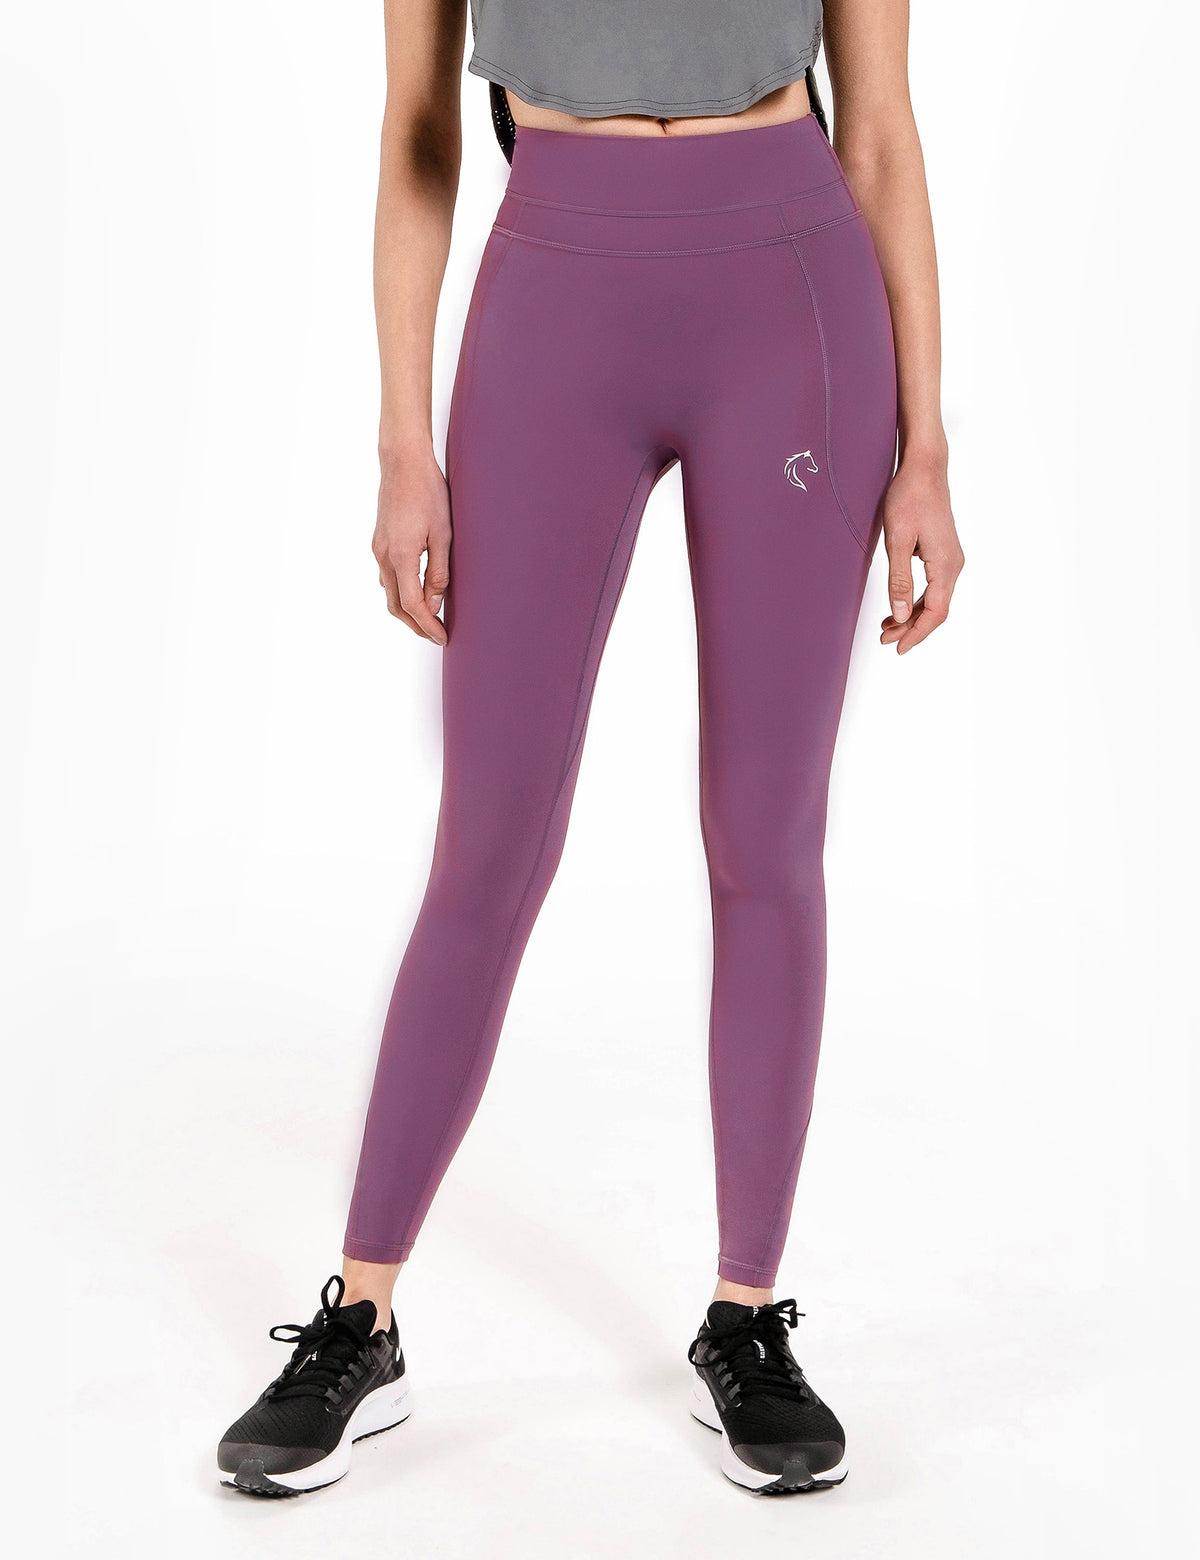 Best Womens Activewear-Biker Shorts, Athletic & Workout Joggers & More